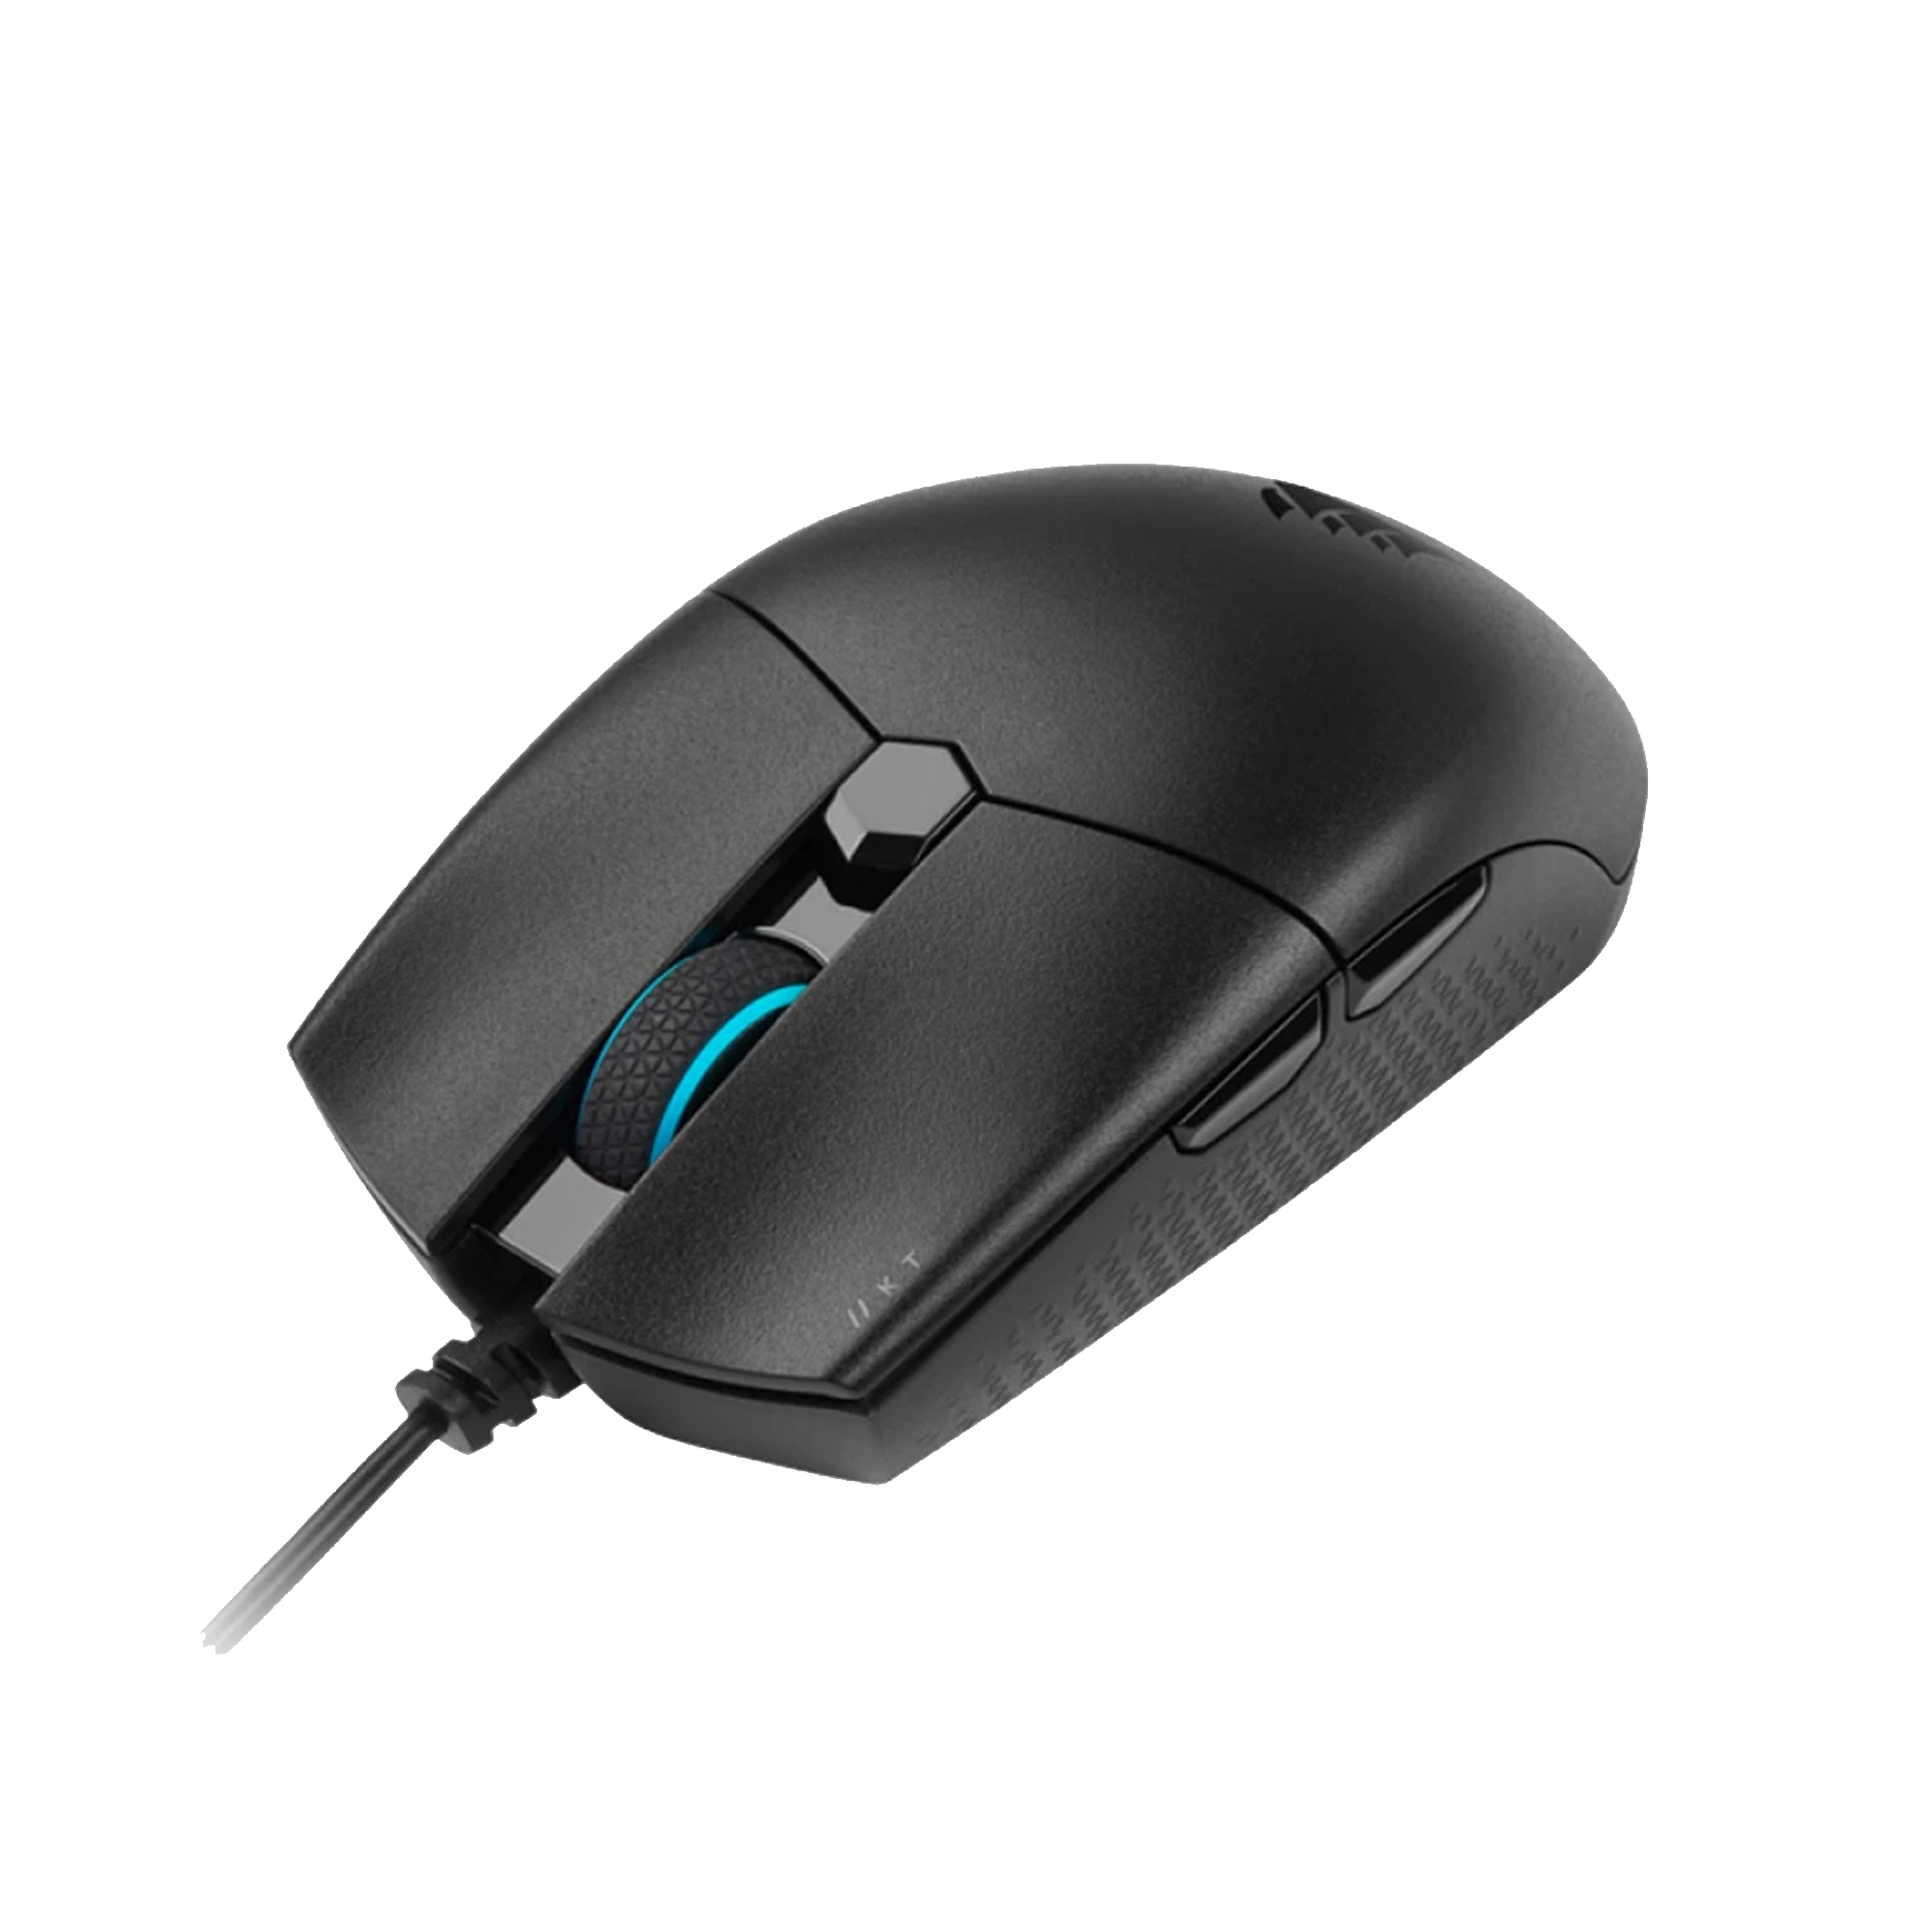 CORSAIR KATAR PRO ULTRA-LIGHT WIRED GAMING MOUSE